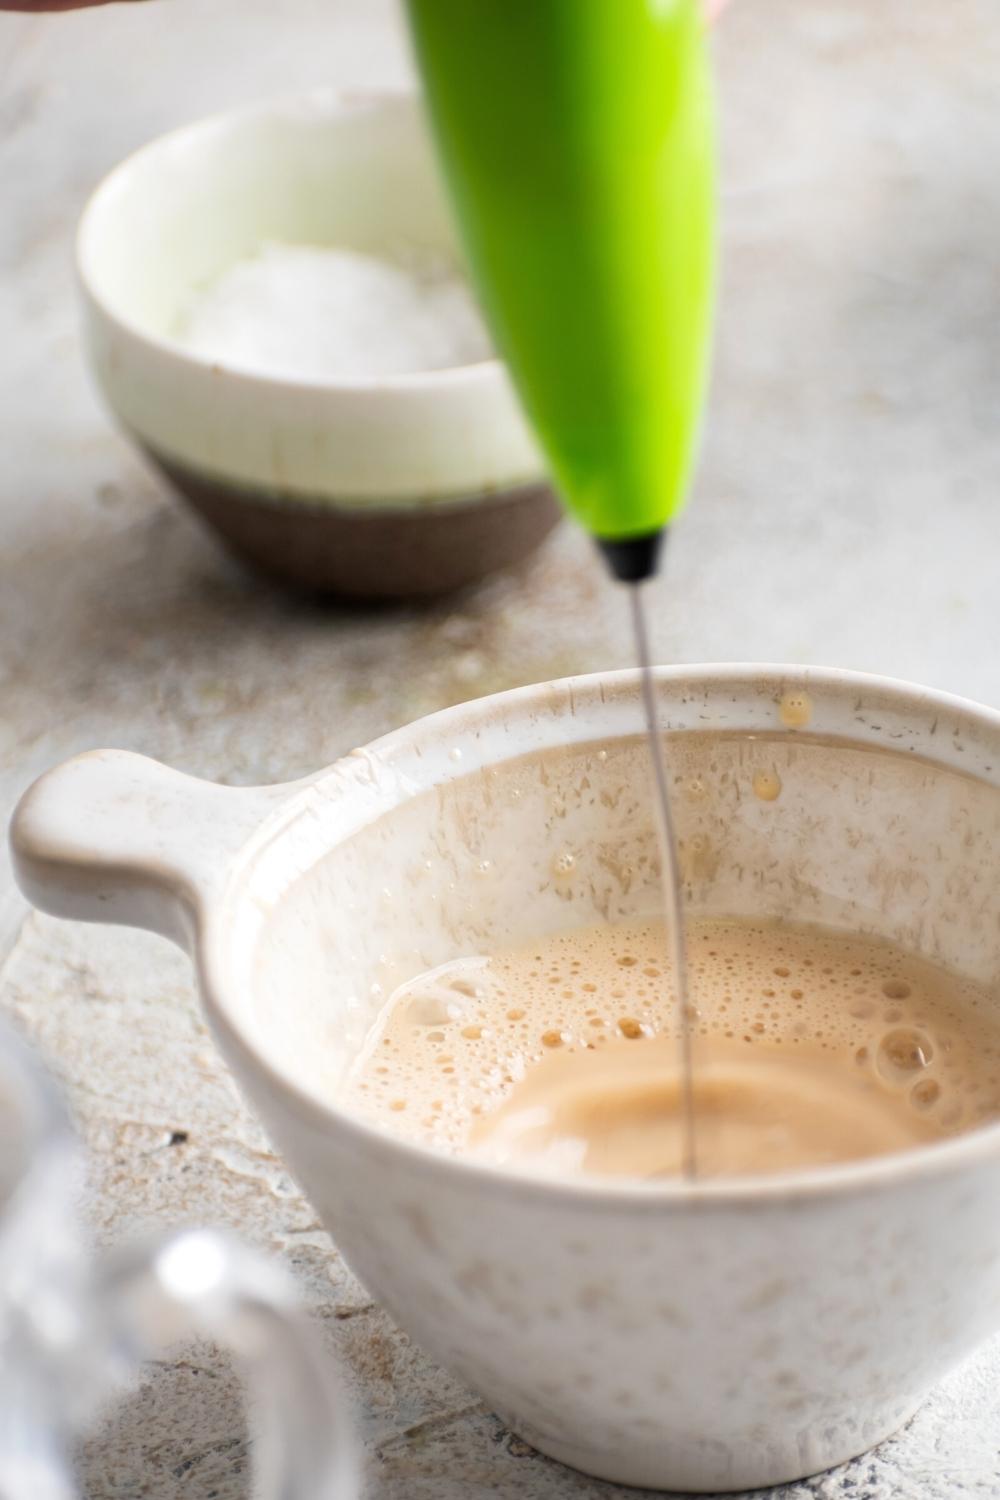 Any immersion blender mixing caramel cold foam in a cup.